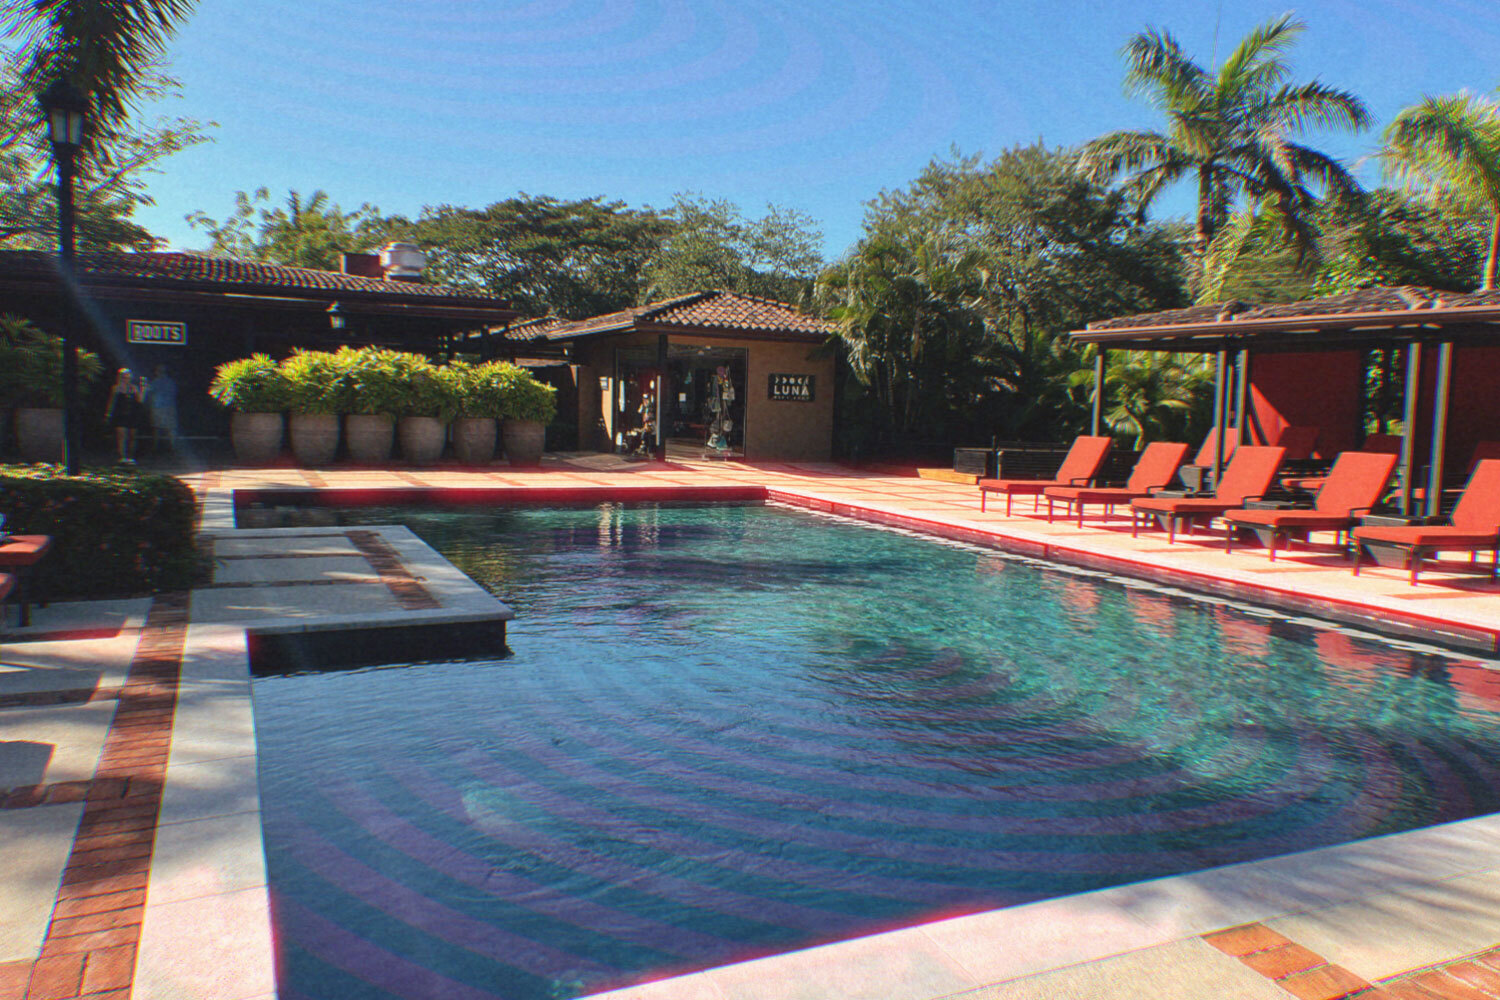 The pool at Rythmia in Costa Rica